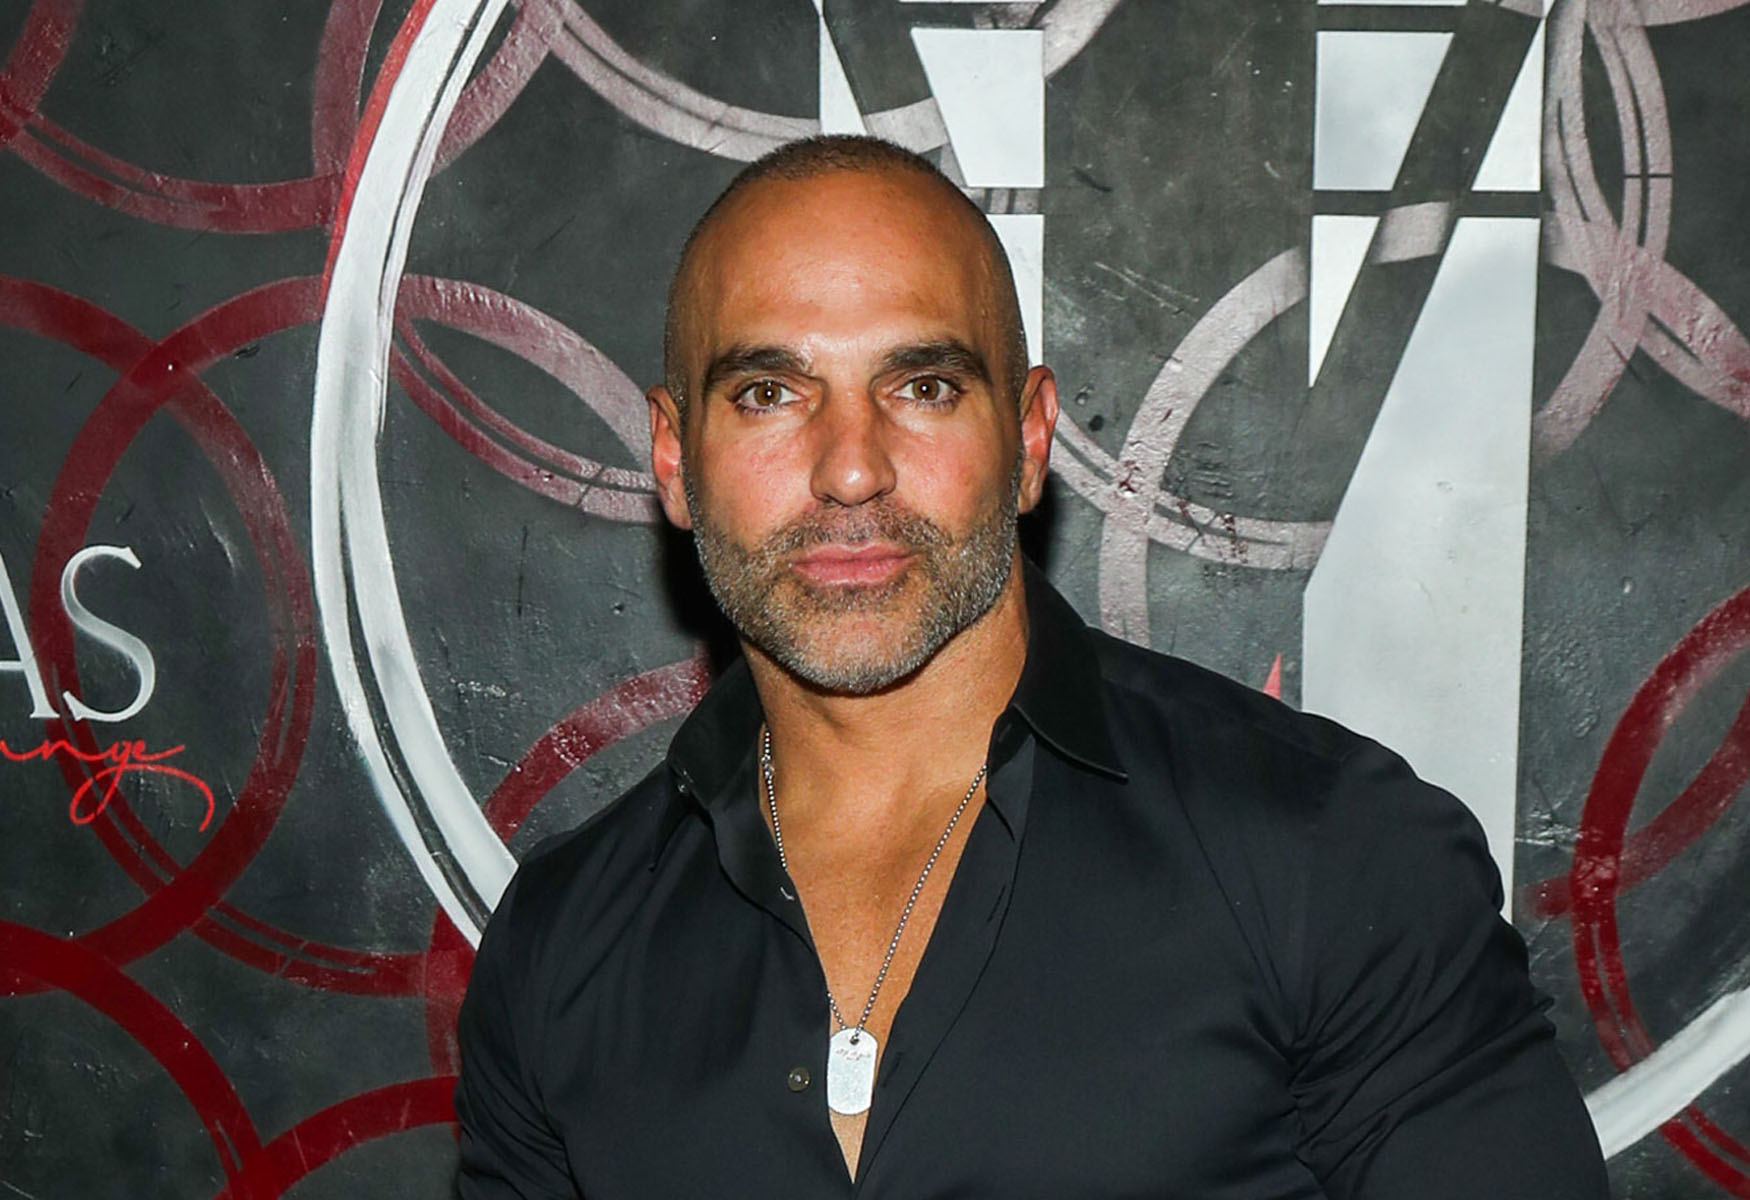 Joe Gorga’s Clash At Son’s Wrestling Match Leads To Ejection